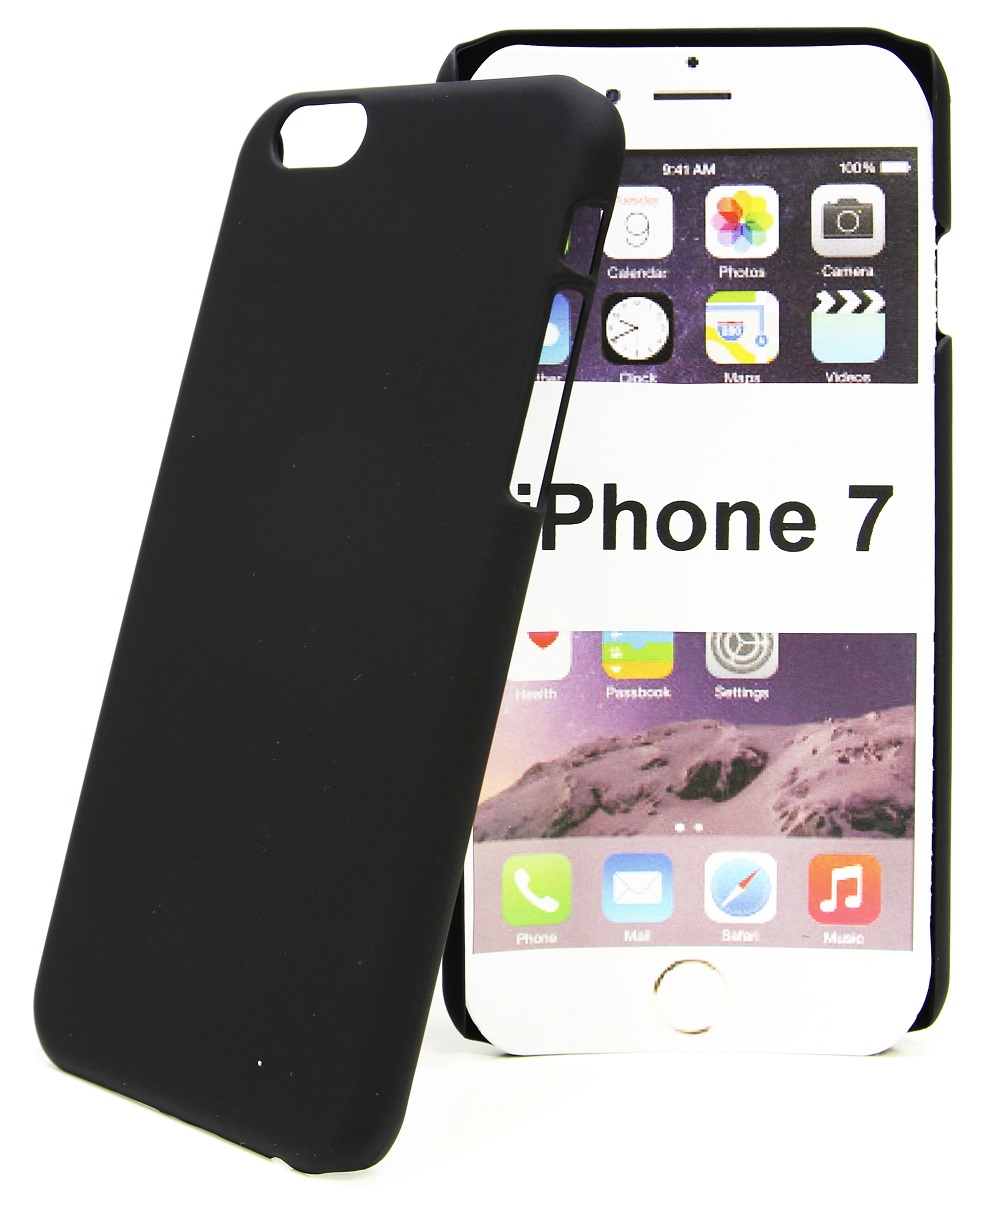 Hardcase Cover iPhone 7